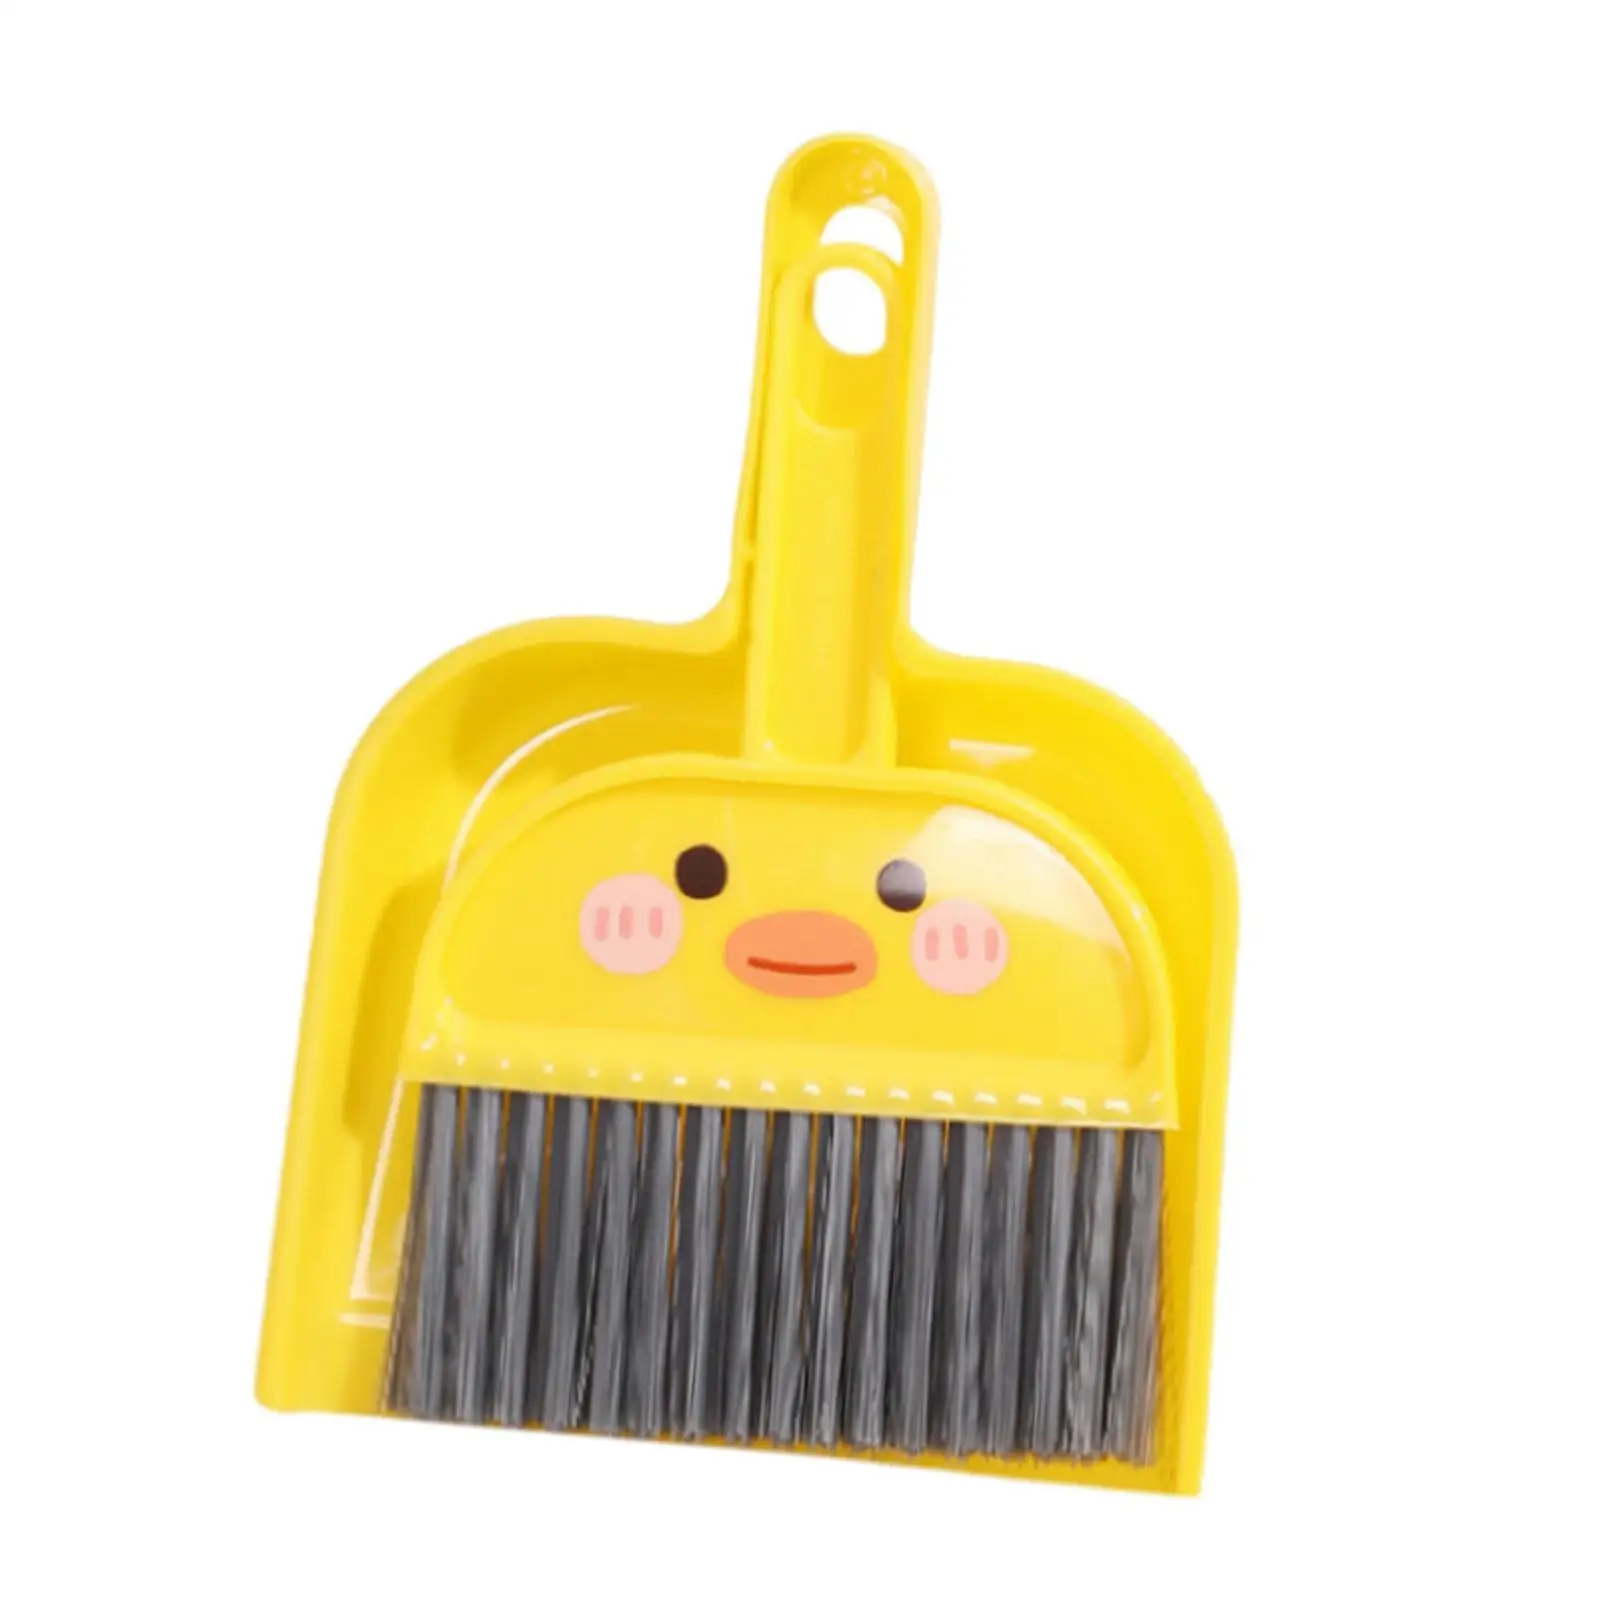 Desktop Dustpan and Broom Set Keyboard Cleaning Brush Pretend Play Toy Hand